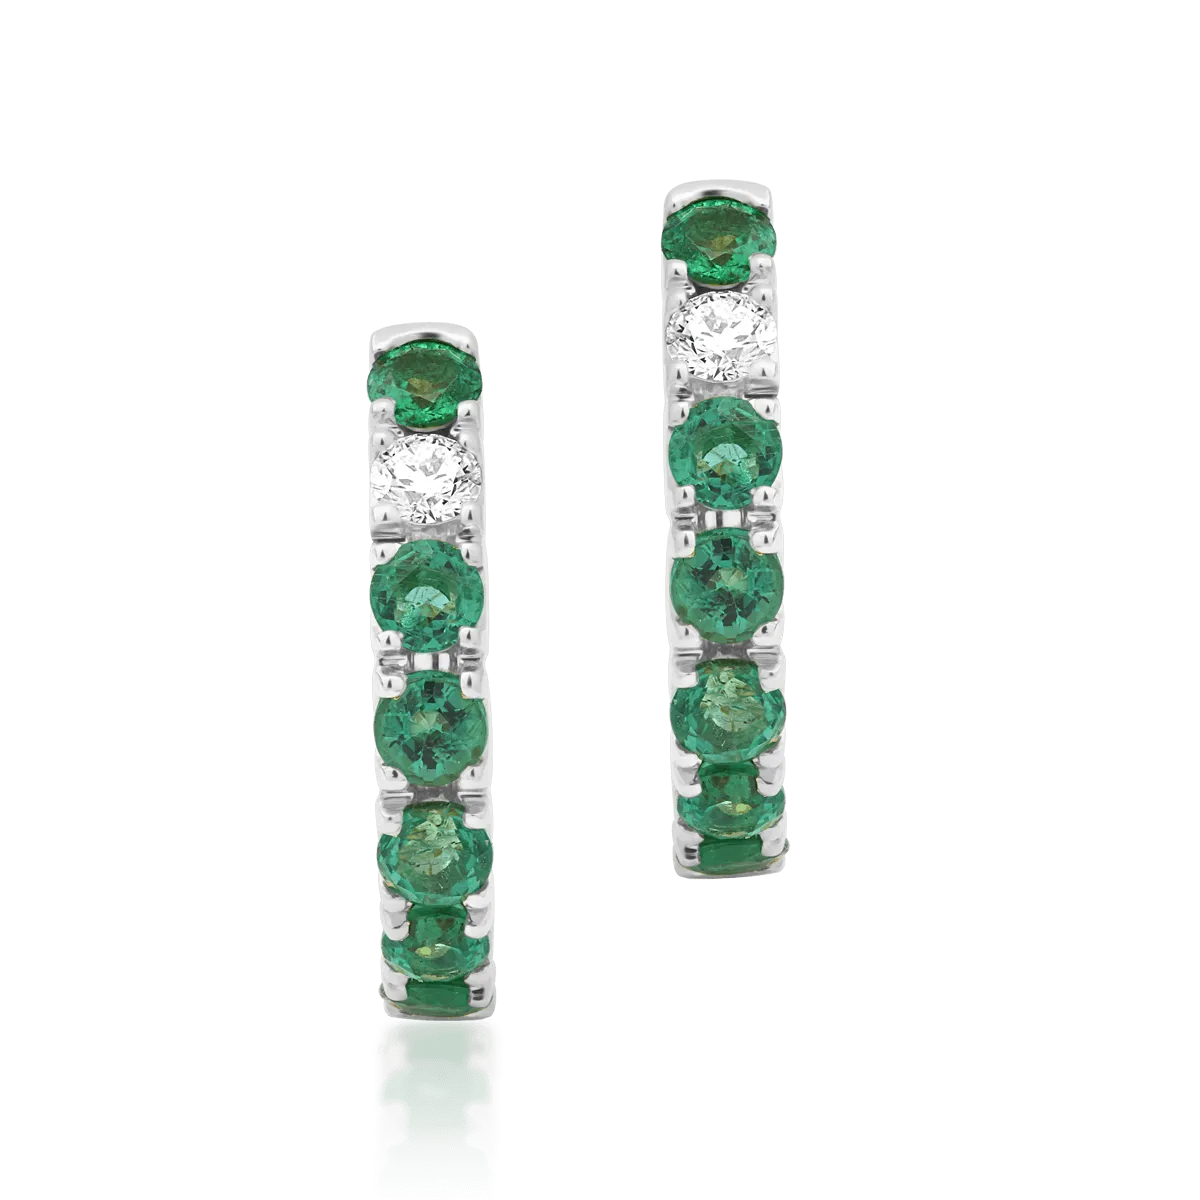 18K white gold earrings with 0.68ct emeralds and 0.1ct diamonds